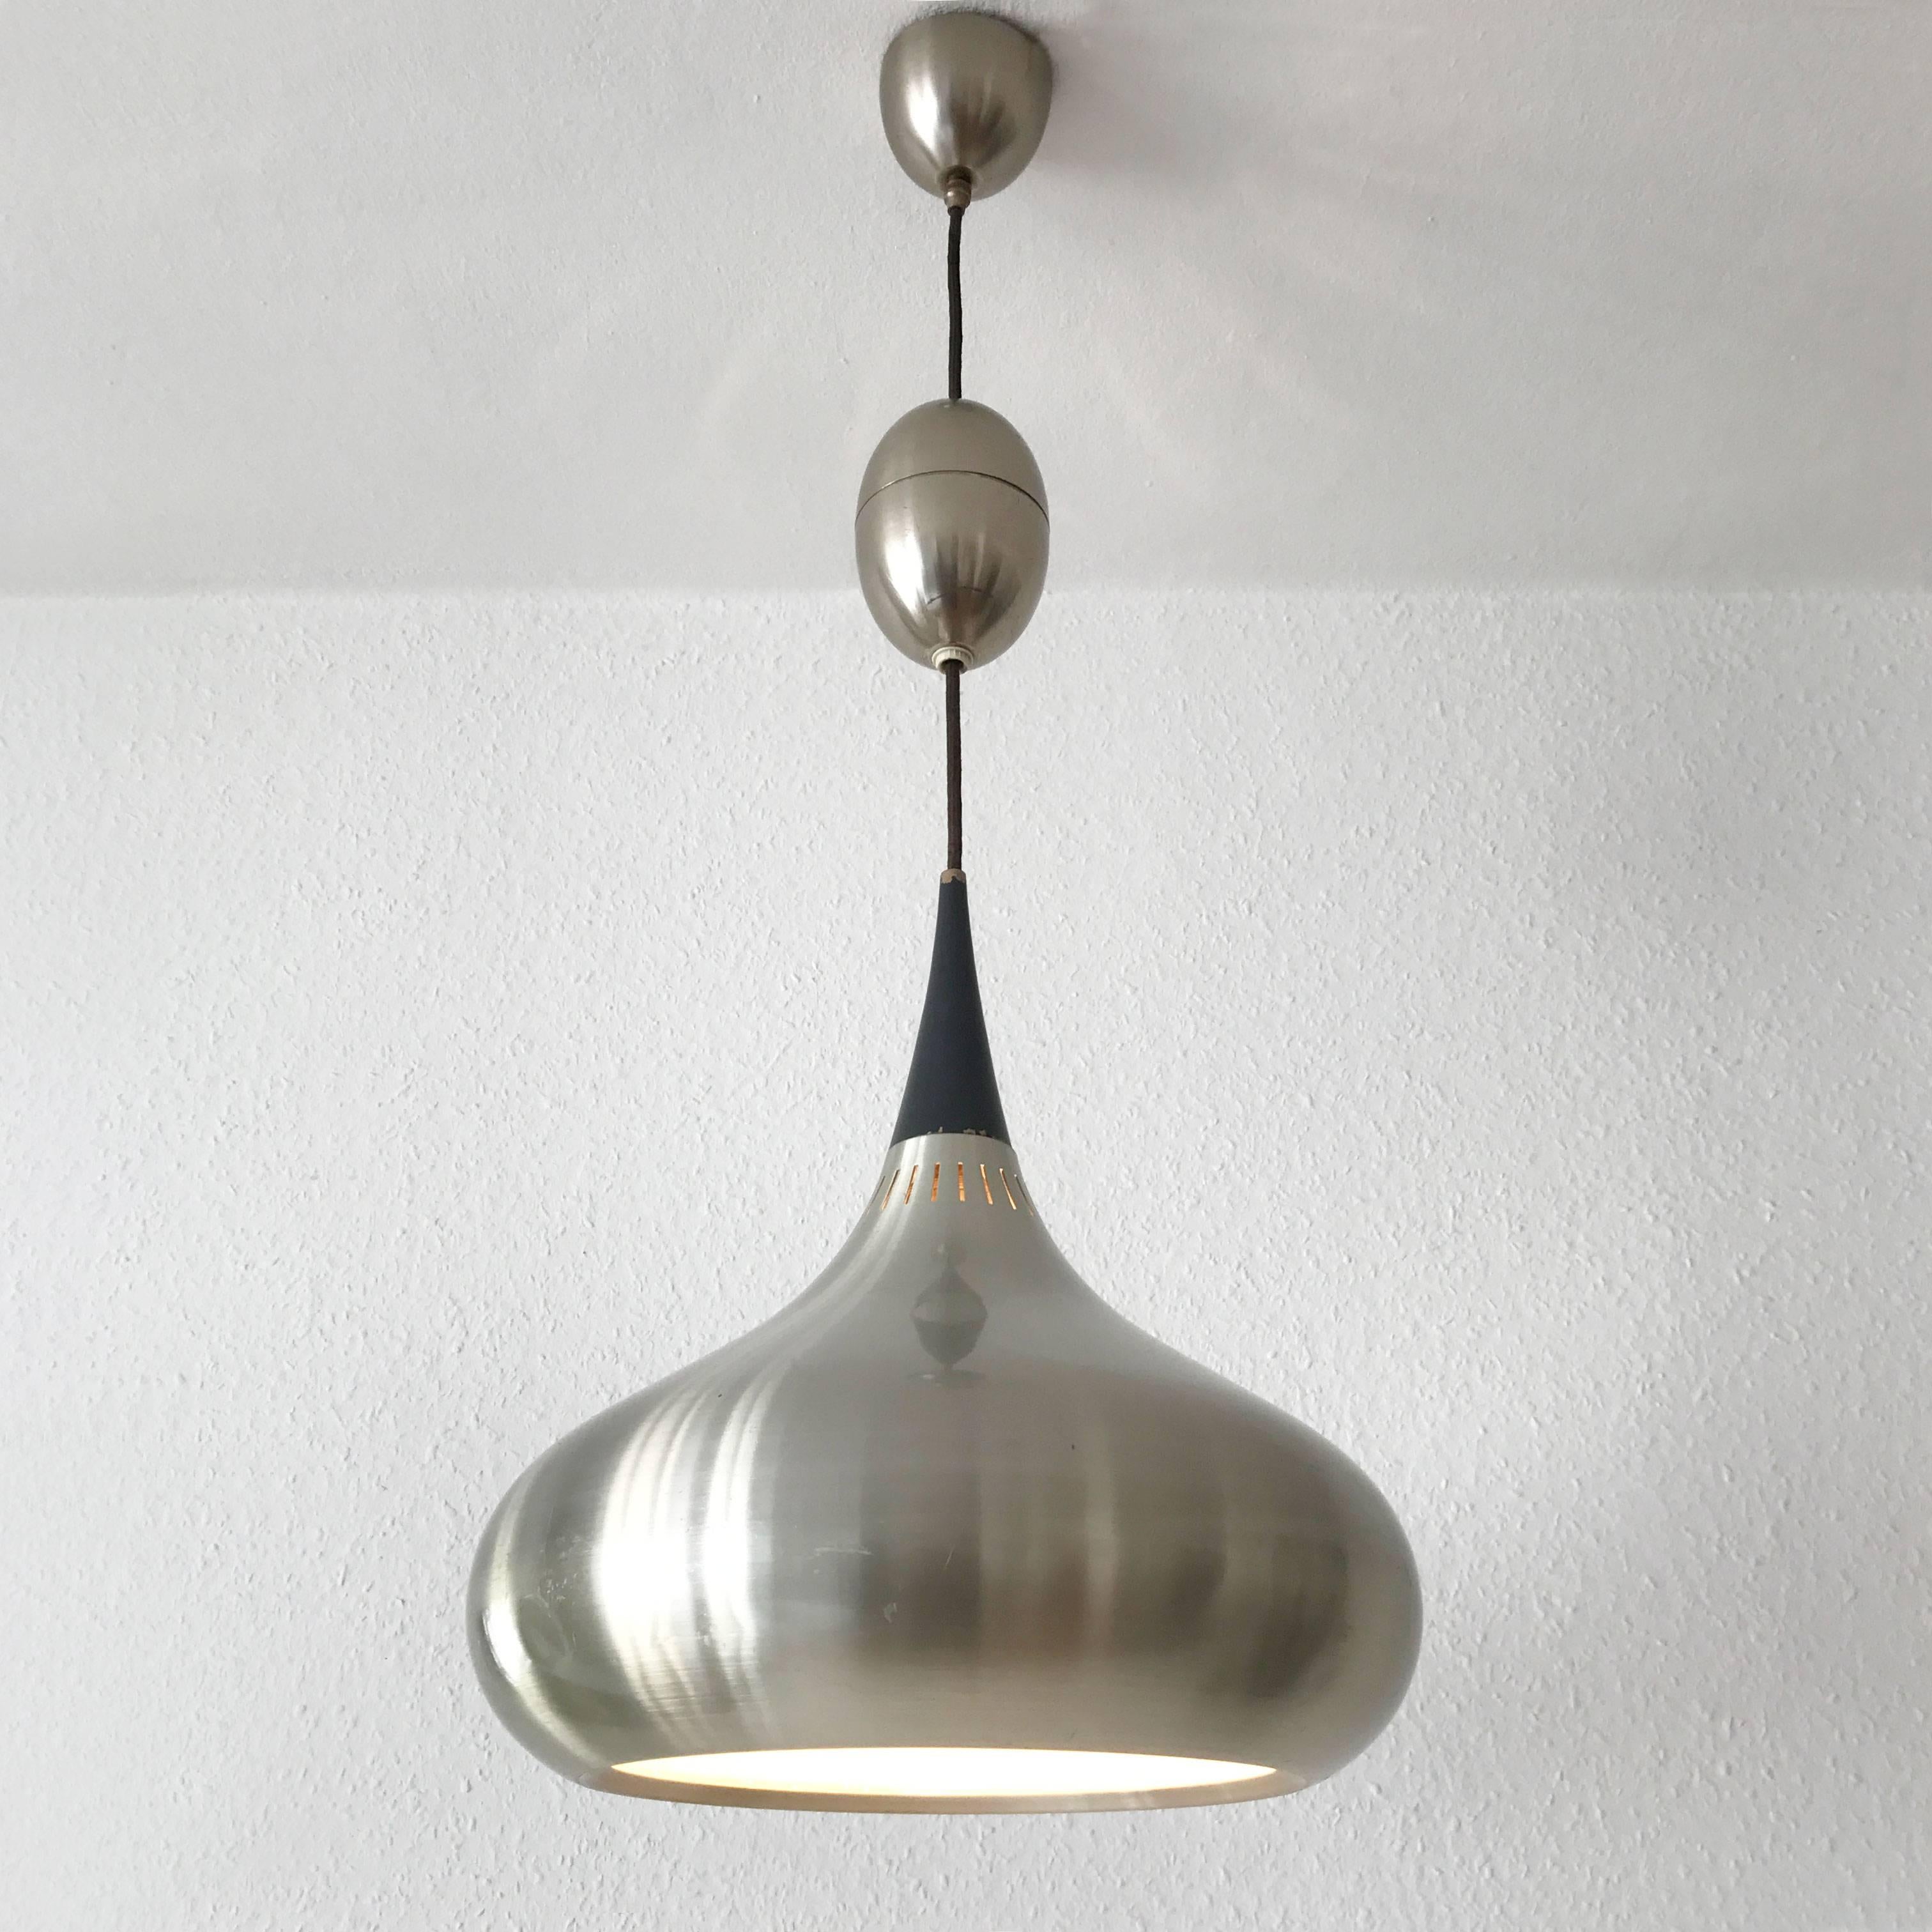 Elegant Mid-Century Modern pendant lamp or hanging light Orient with pull down egg. Designed by Jo Hammerborg for Fog & Mørup in 1960s, Denmark.
The lamp is executed with one E27 screw fit bulb holder. Delivery without bulbs. It is wired and